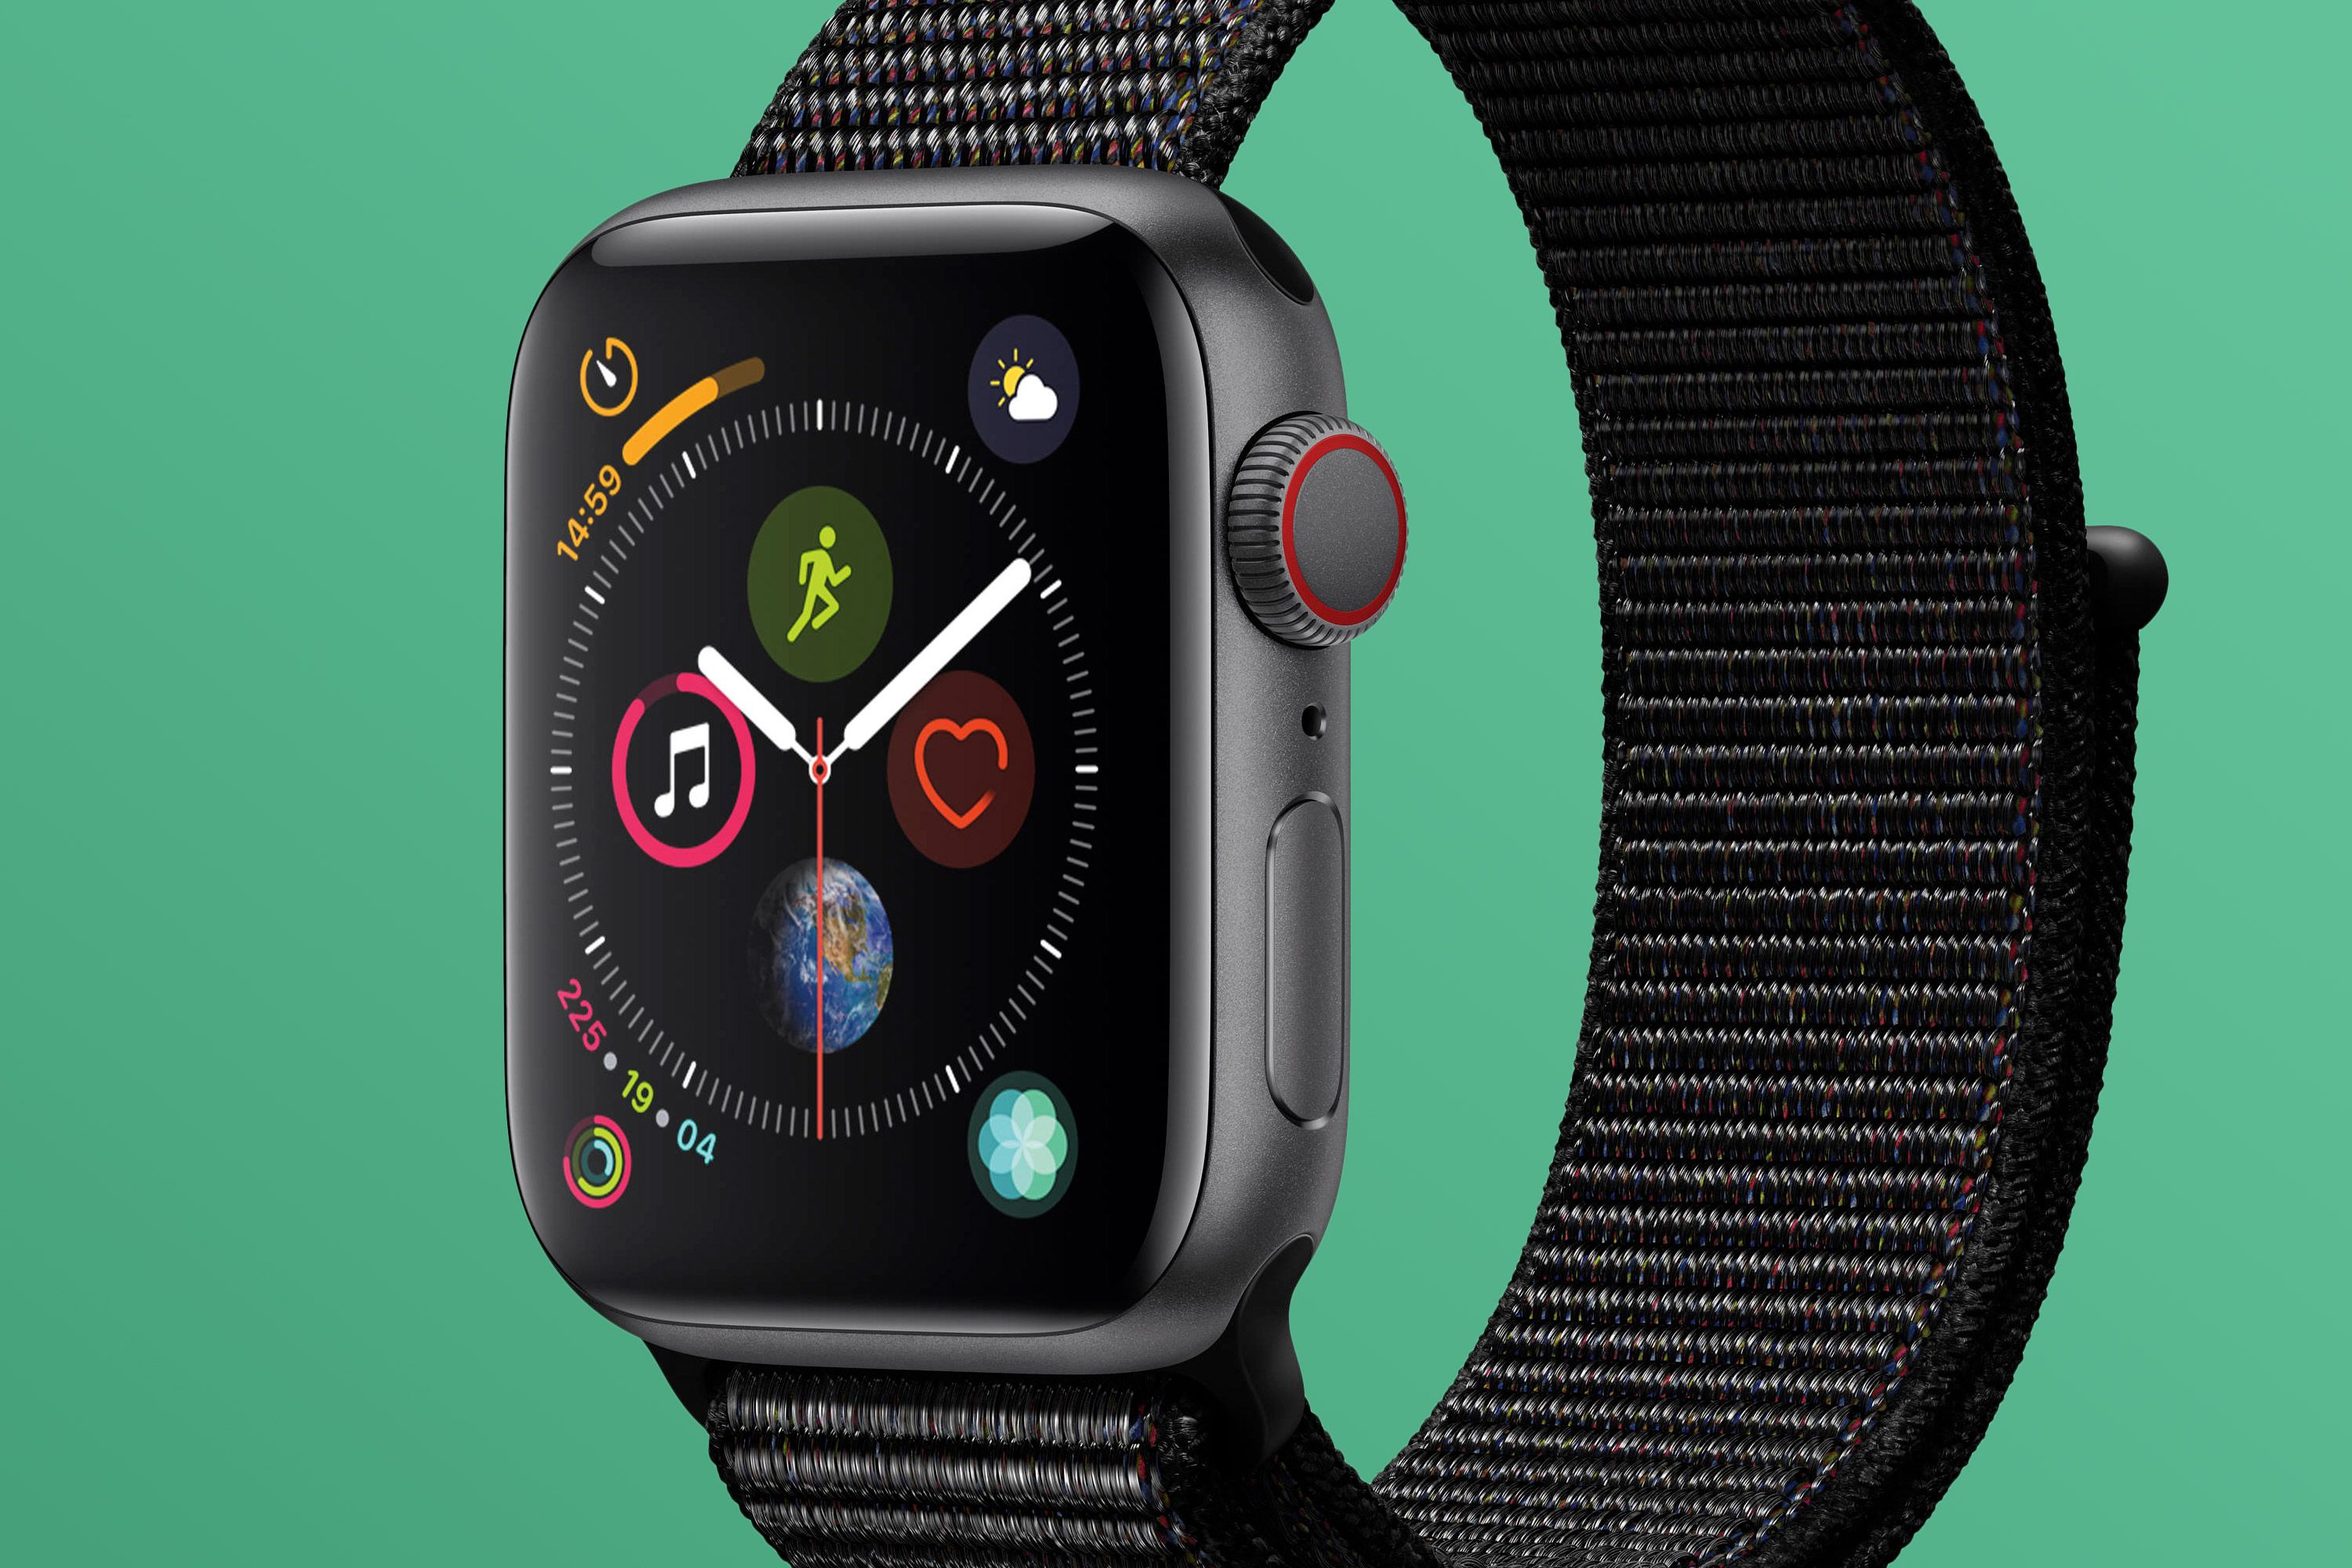 How to Find the Elusive Apple Watch Series 4